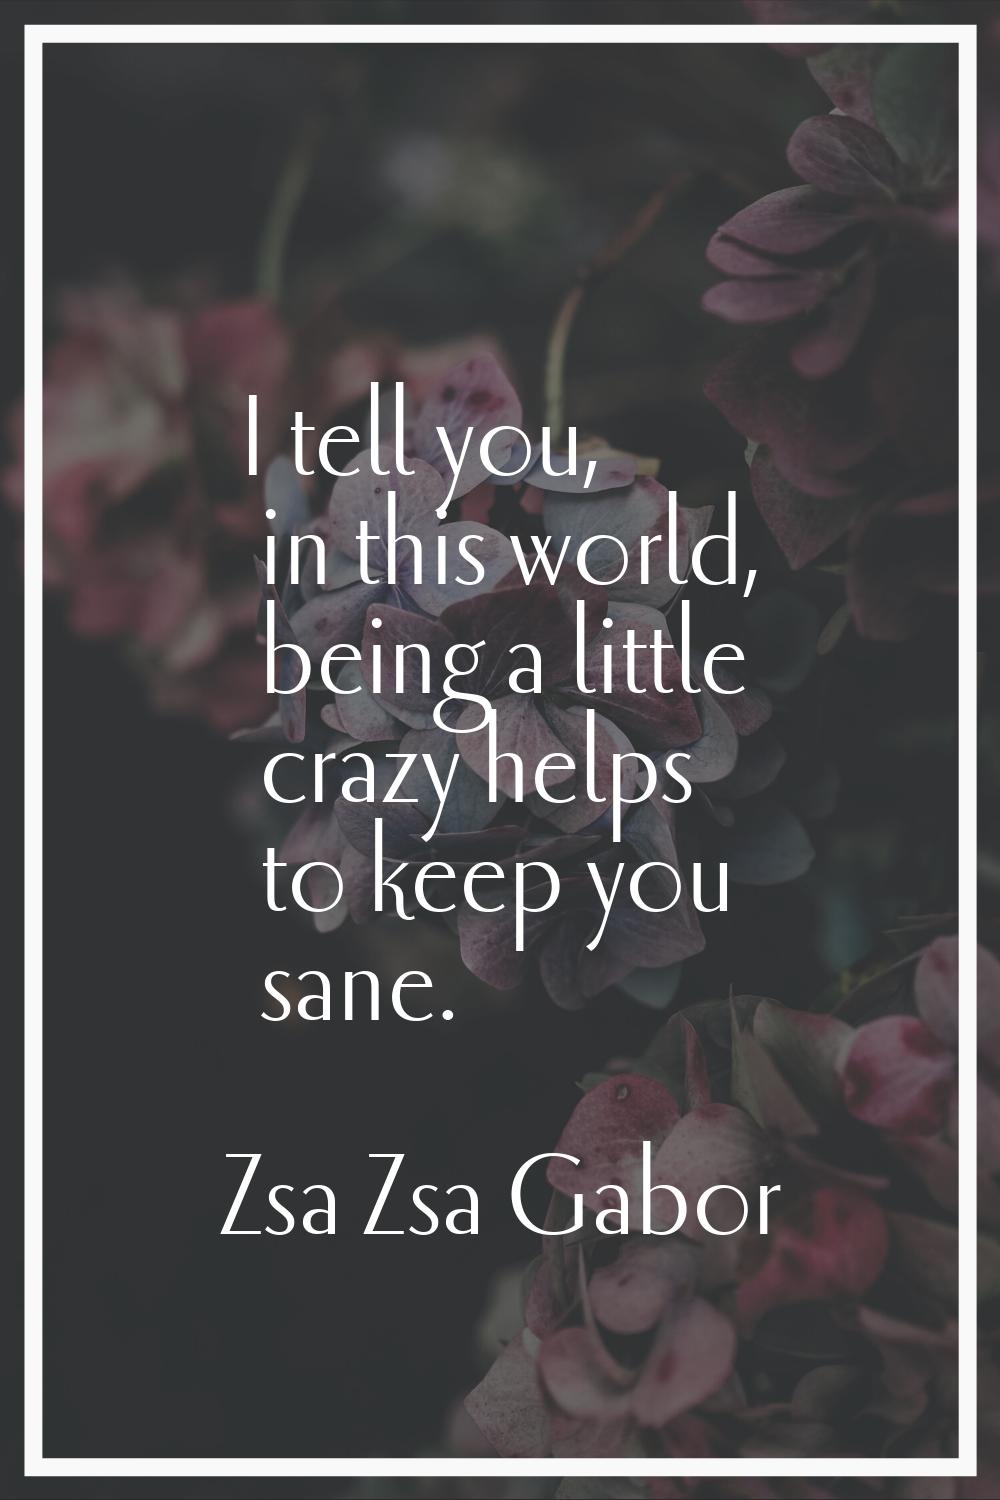 I tell you, in this world, being a little crazy helps to keep you sane.